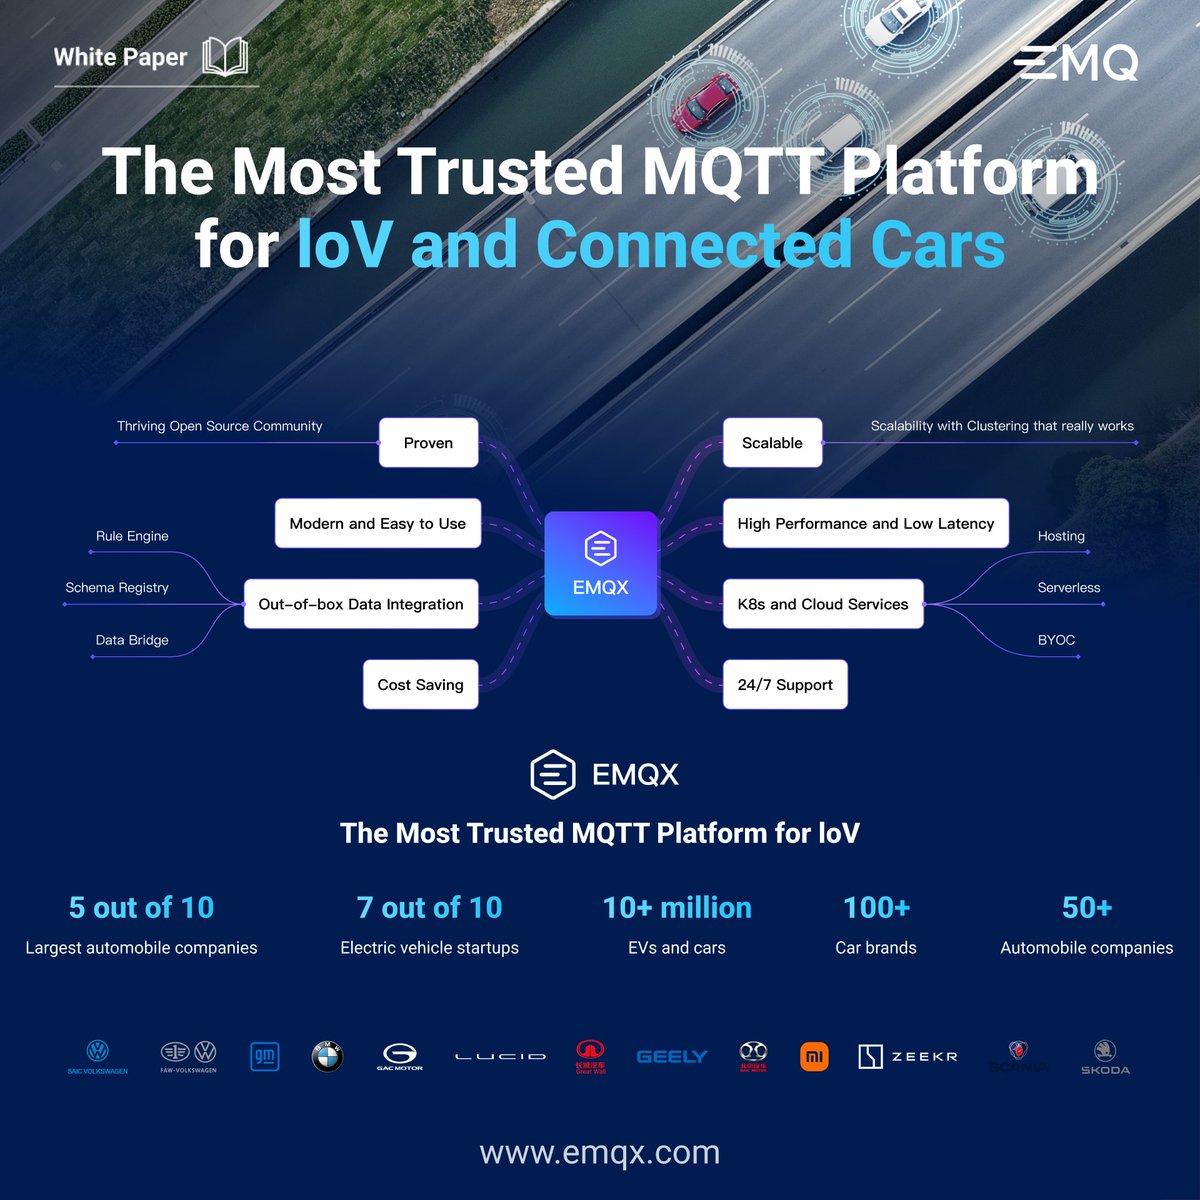 🚗 Rev up for the #automotive revolution with #MQTT and #EMQXPlatform!

■ Learn why MQTT is the industry standard and EMQX is the premier choice for #connectedcars.

Download Now ⬇️
💻 shorturl.at/cflyC

#IoV #VehicleTracking #ConnectedVehicles